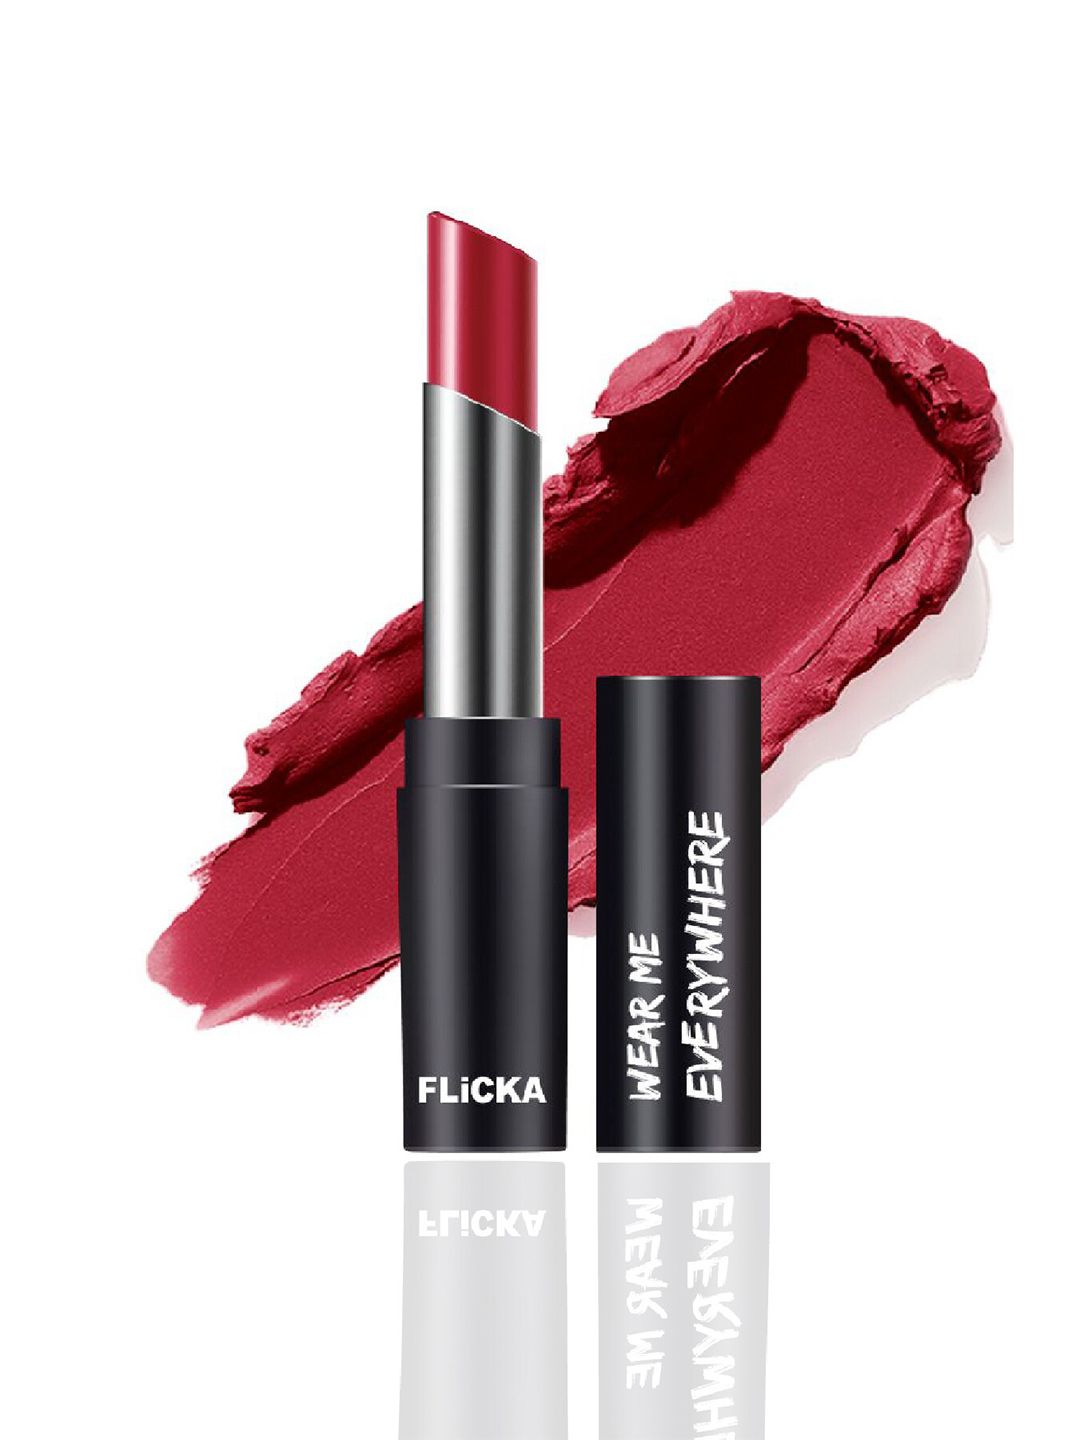 FLiCKA Wear Me Everywhere Creamy Matte Lipstick - Drop Dead Red 01 Price in India